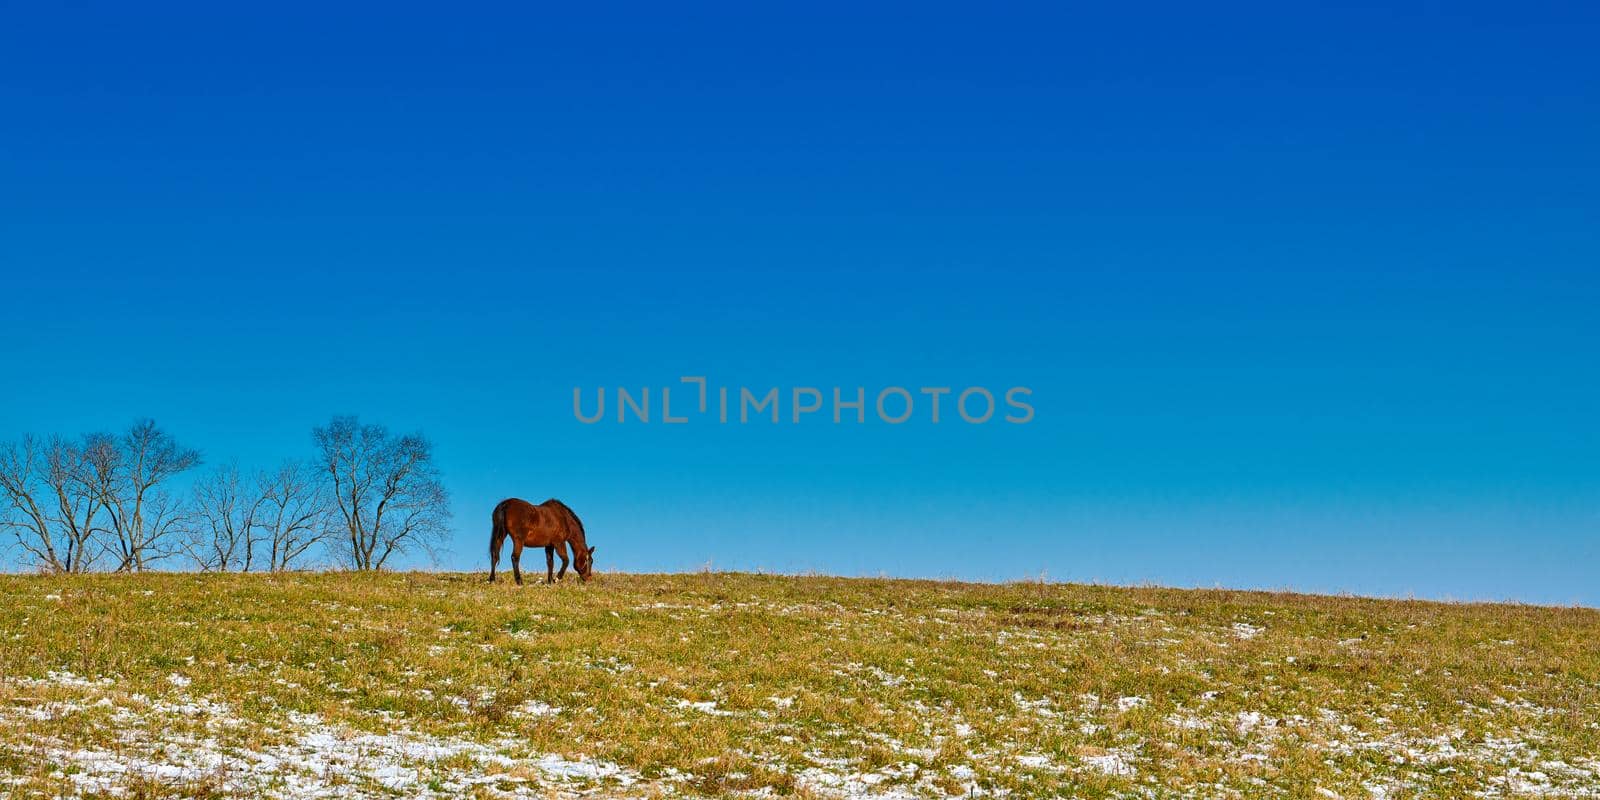 Single horse grazing in a field in winter with blue skies. by patrickstock